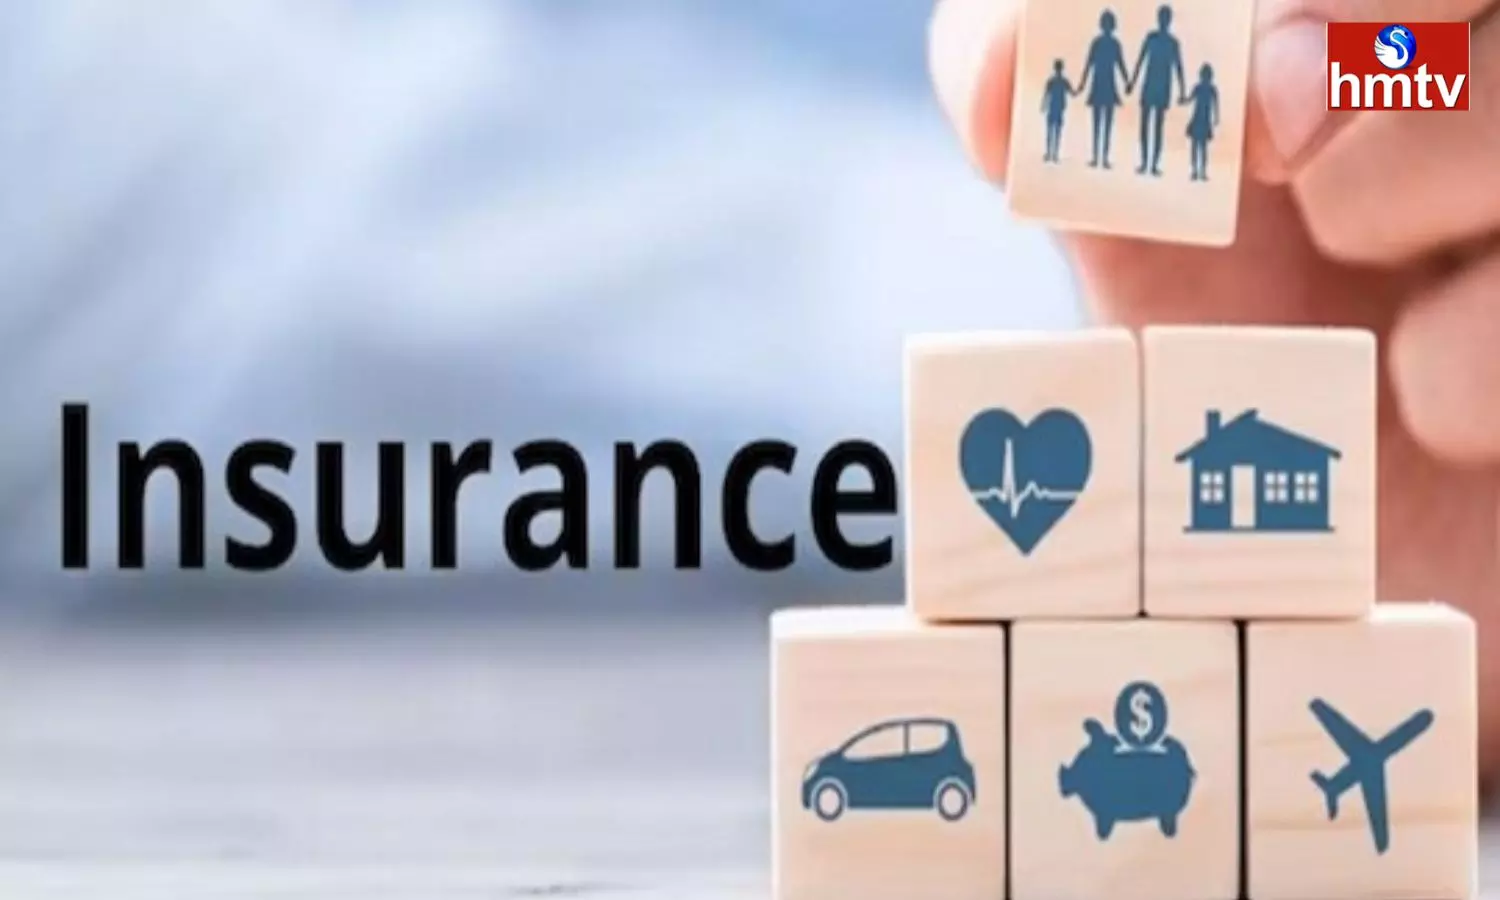 Are you taking an insurance policy there are changes in the rules from April 1